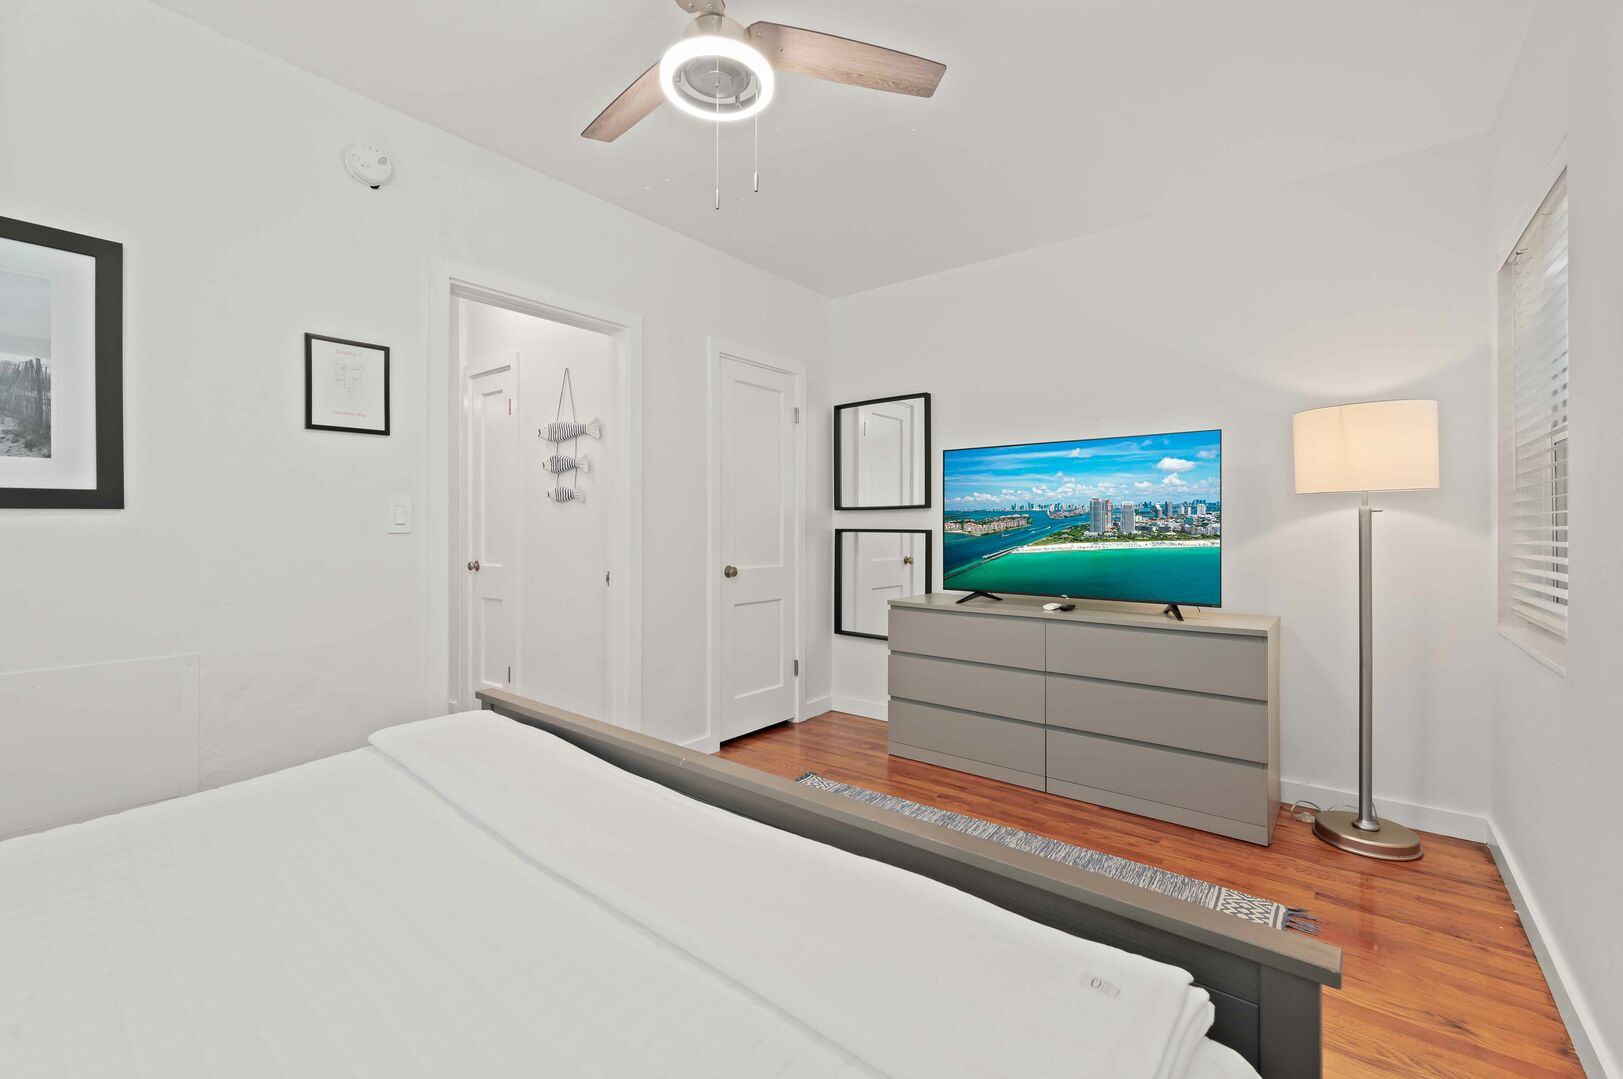 The spacious bedroom offers plenty of daylight, a king size bed and a smart TV.